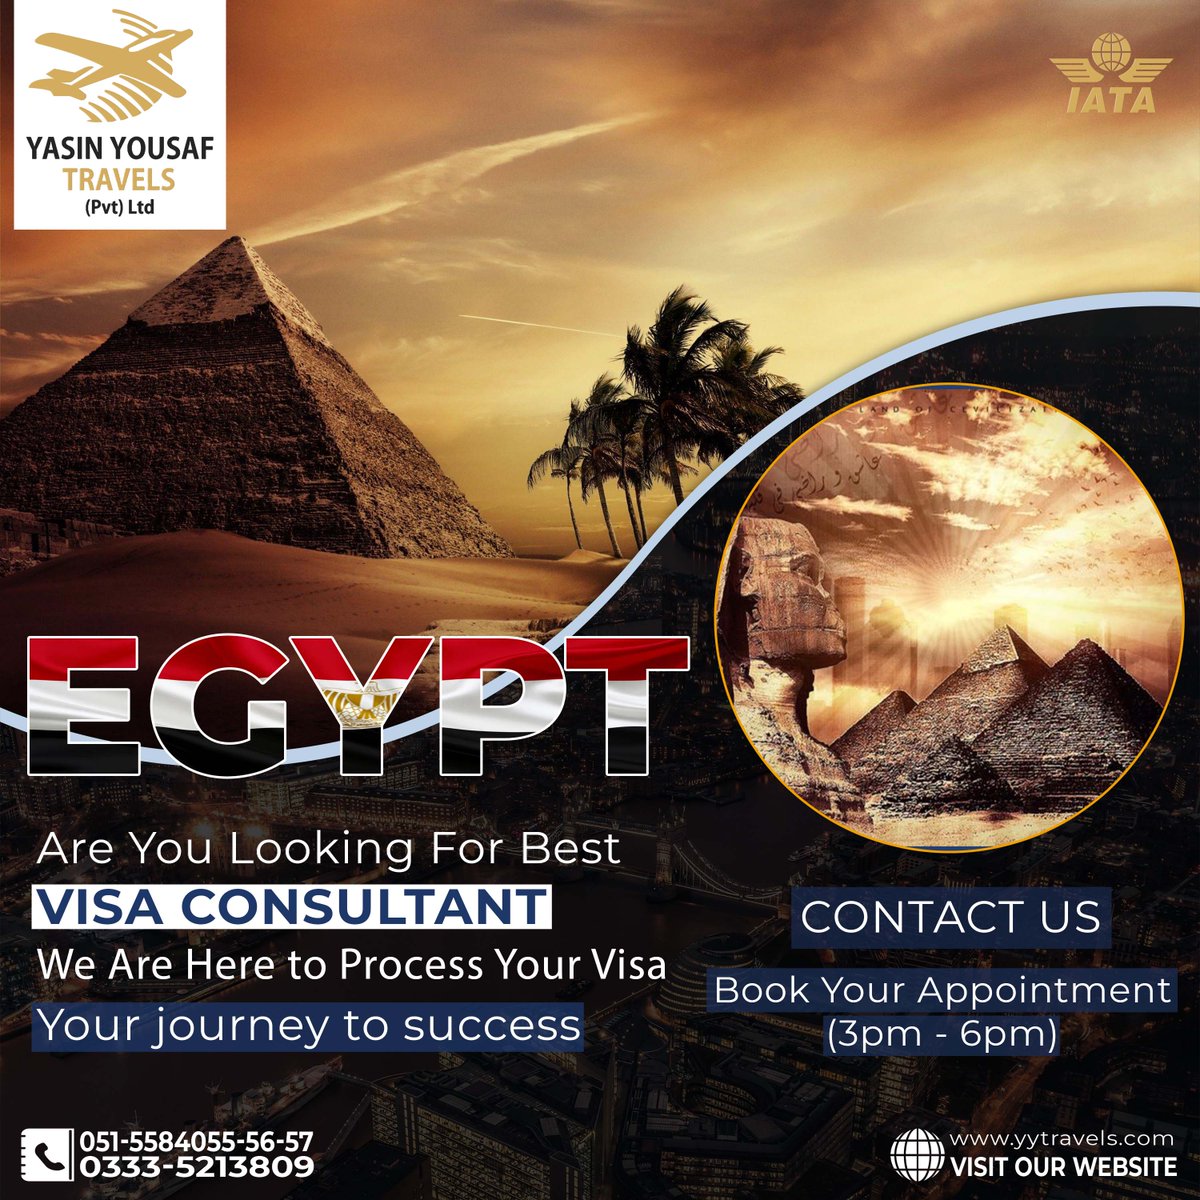 Are you looking for best VISA CONSULTANT?

We are here to process your VISA and your journey to success.
Booking Your Appointment (3pm - 6pm)
Contact Us.

📞: 051-5584055-56-57
📧: yasin@yytravels.com

#visaconsultant #egyptvisa #travelagency